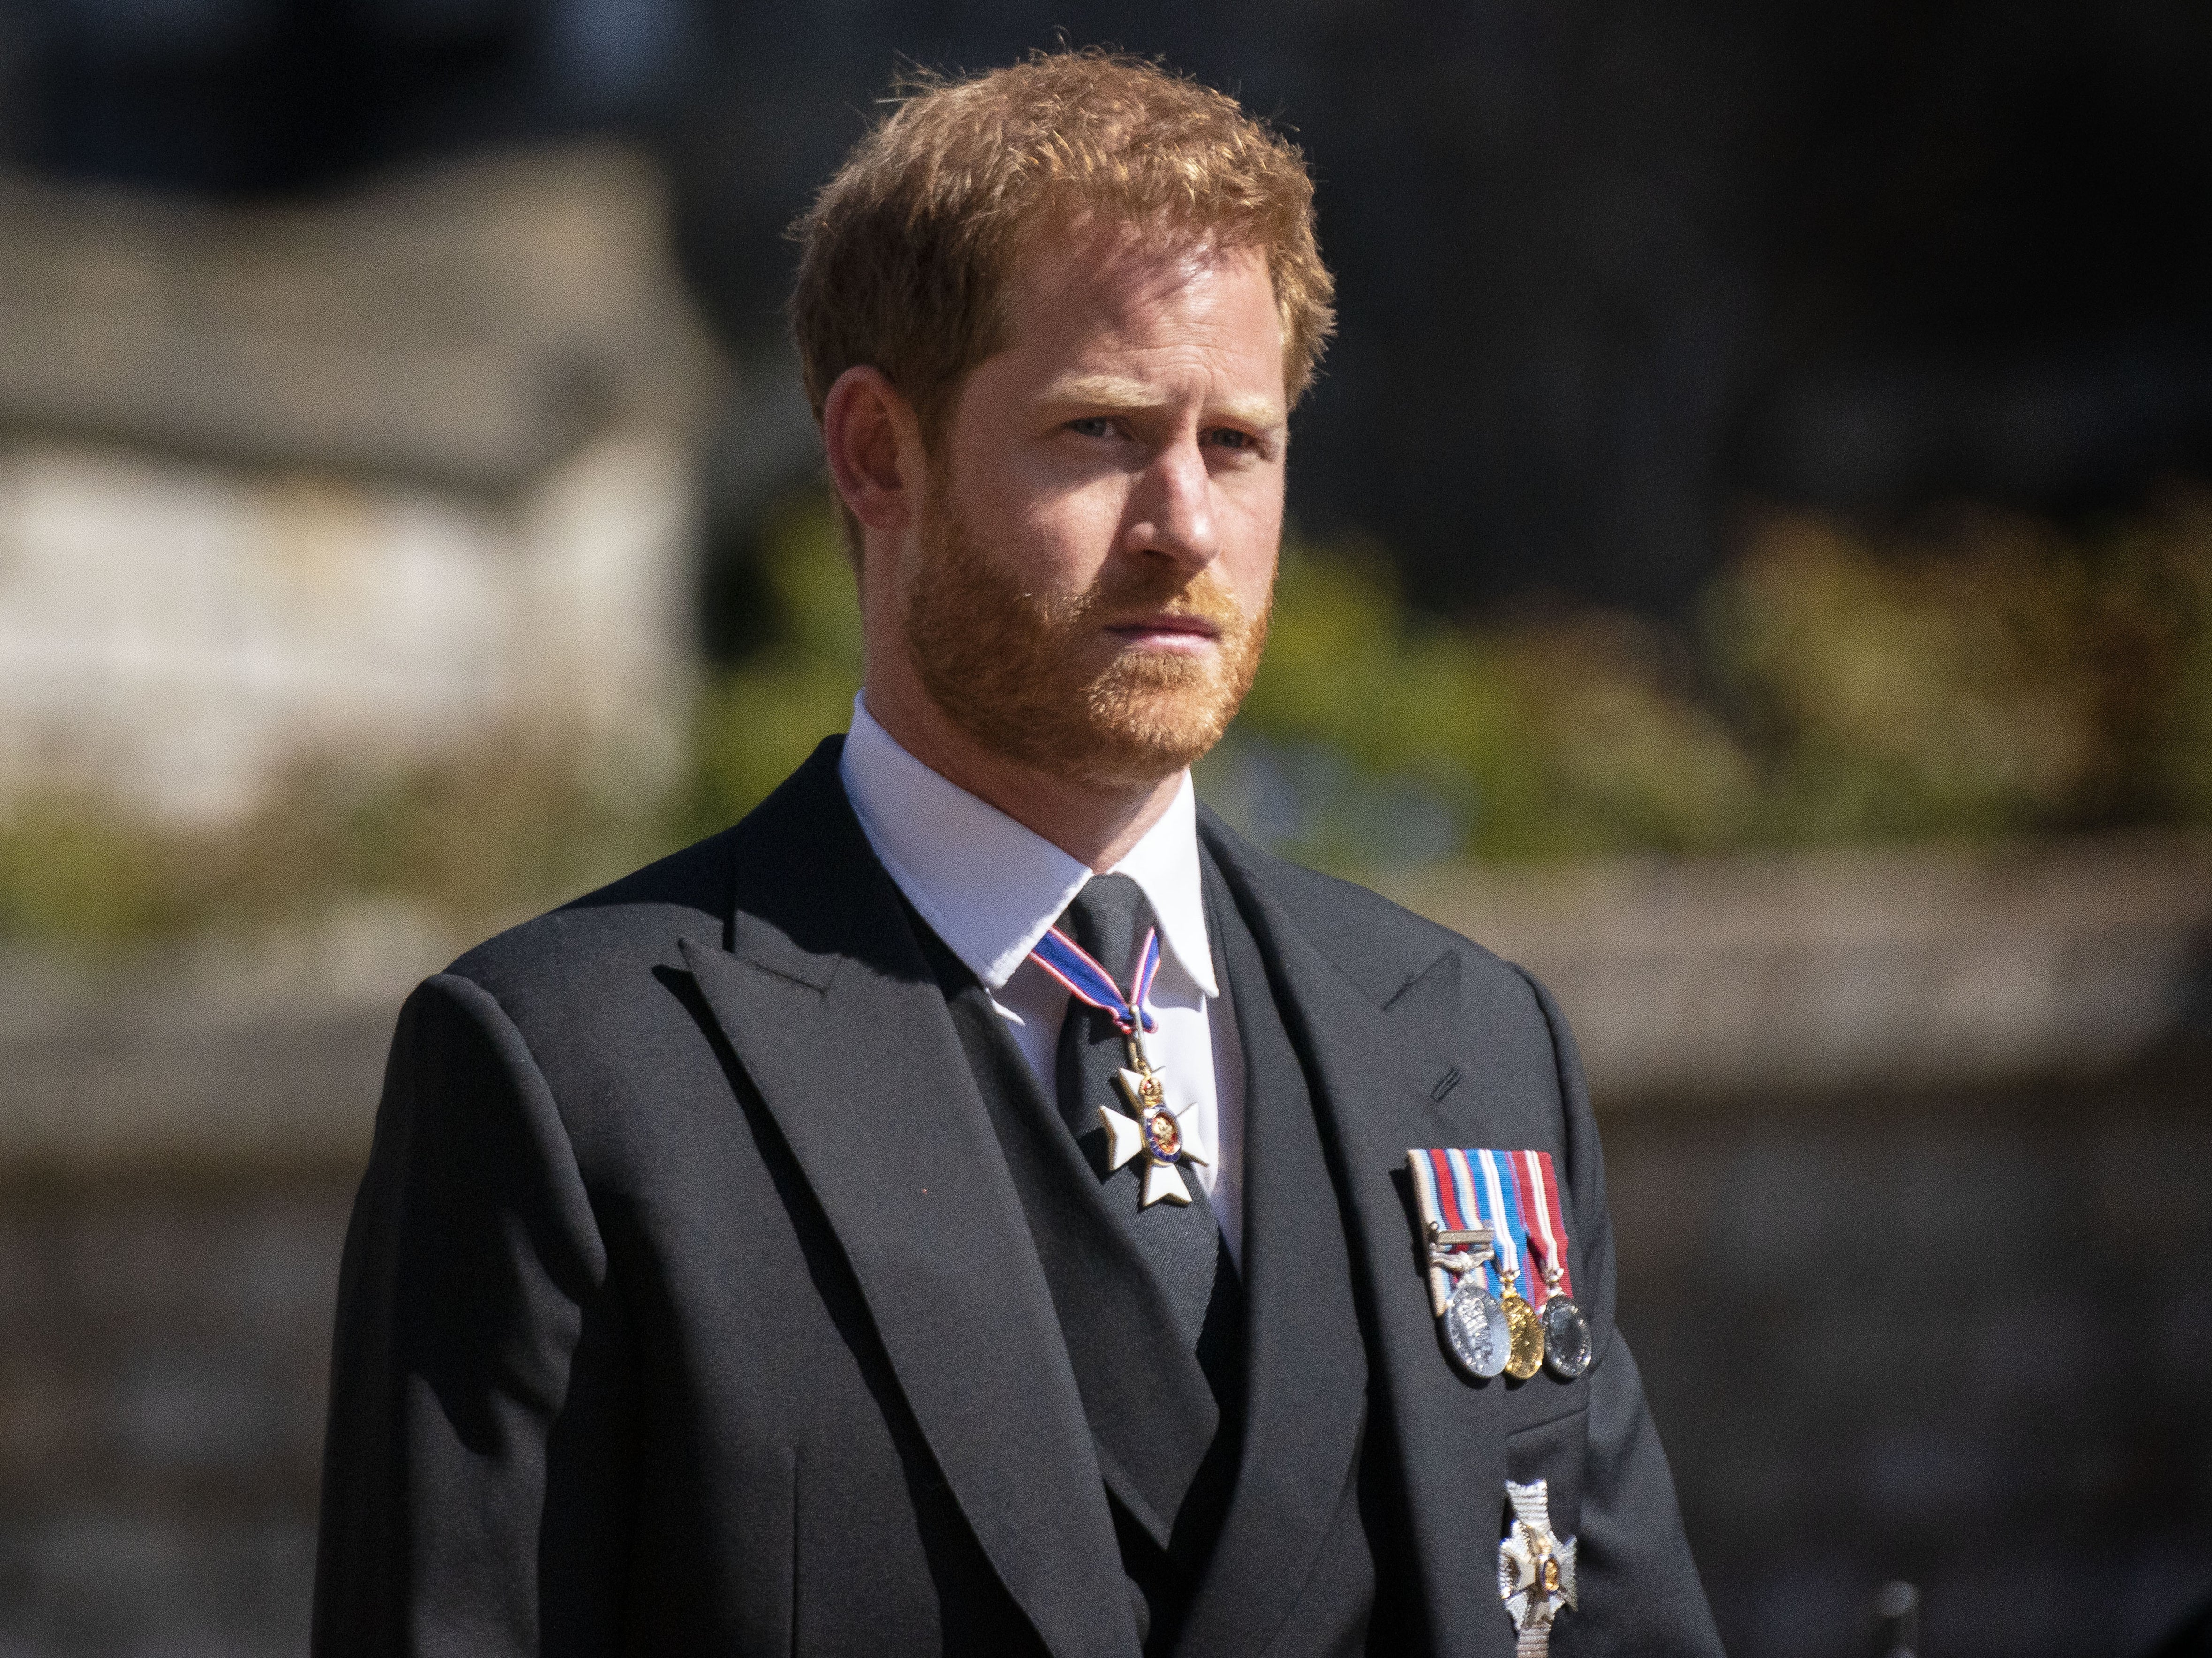 Prince Harry during the funeral of the Duke of Edinburgh